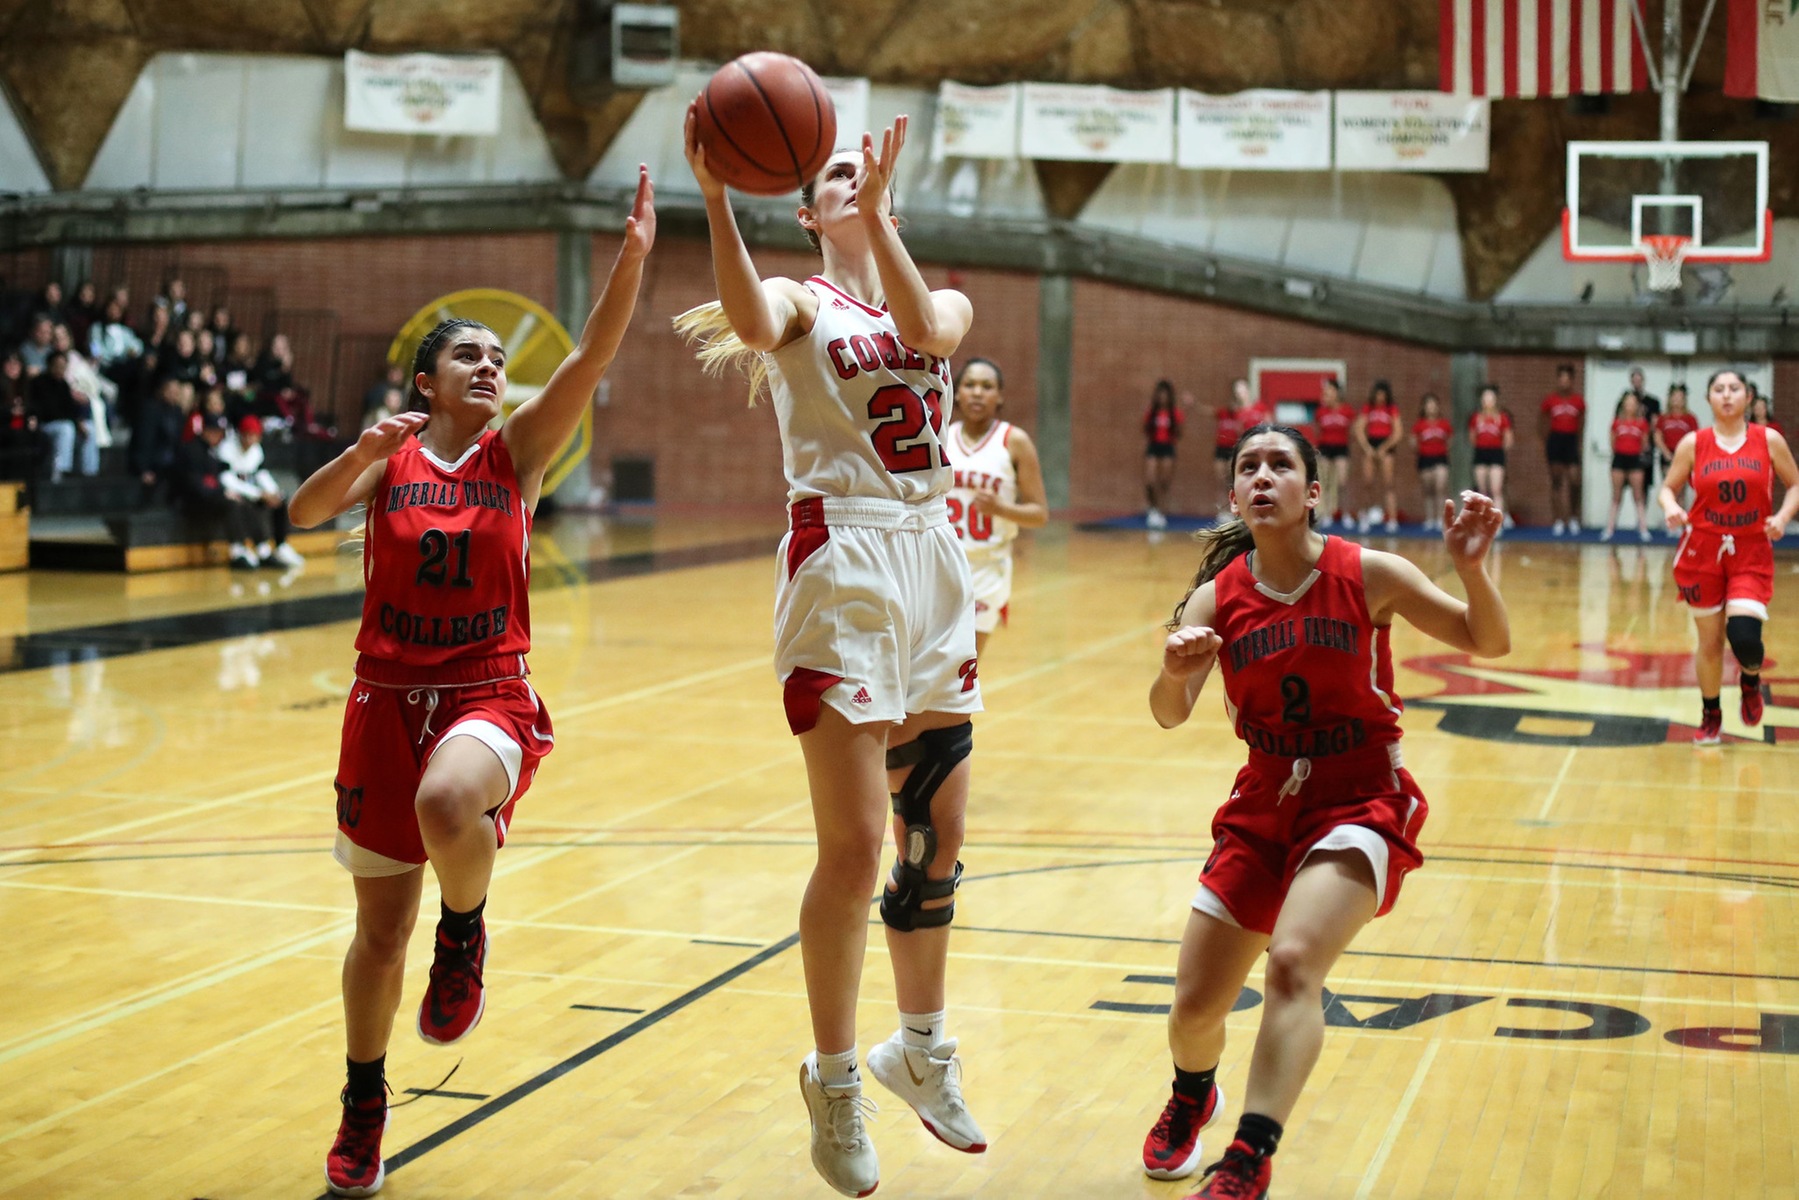 Lilly Crabtree had seven rebounds against Mesa. Photo by Hugh Cox (taken 2/14).